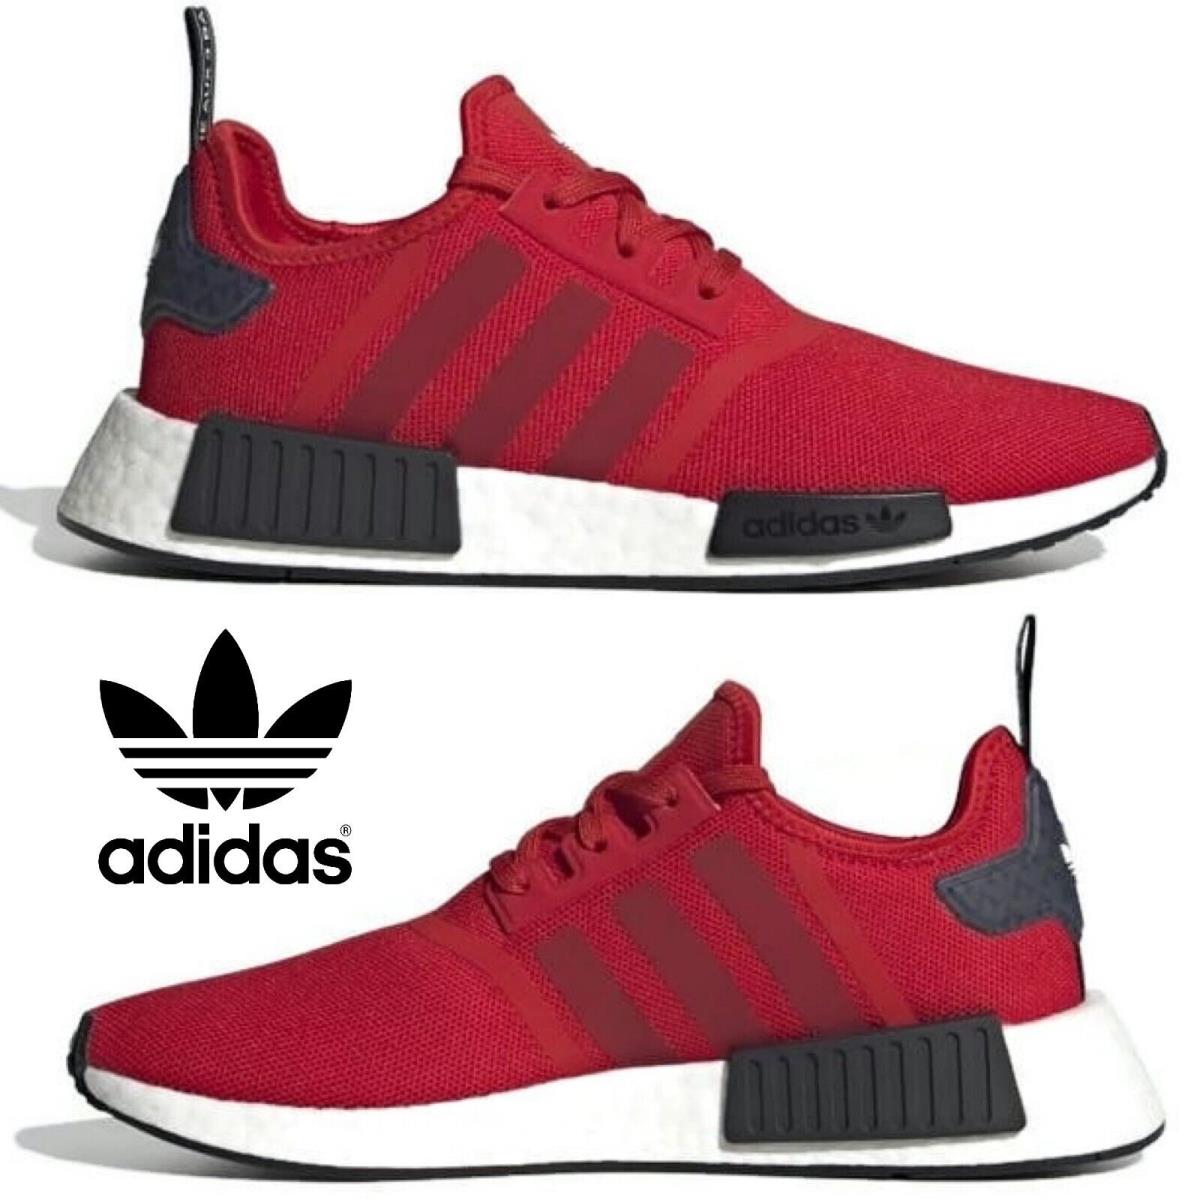 Adidas Originals Nmd R1 Men`s Sneakers Running Shoes Gym Casual Sport Black Red